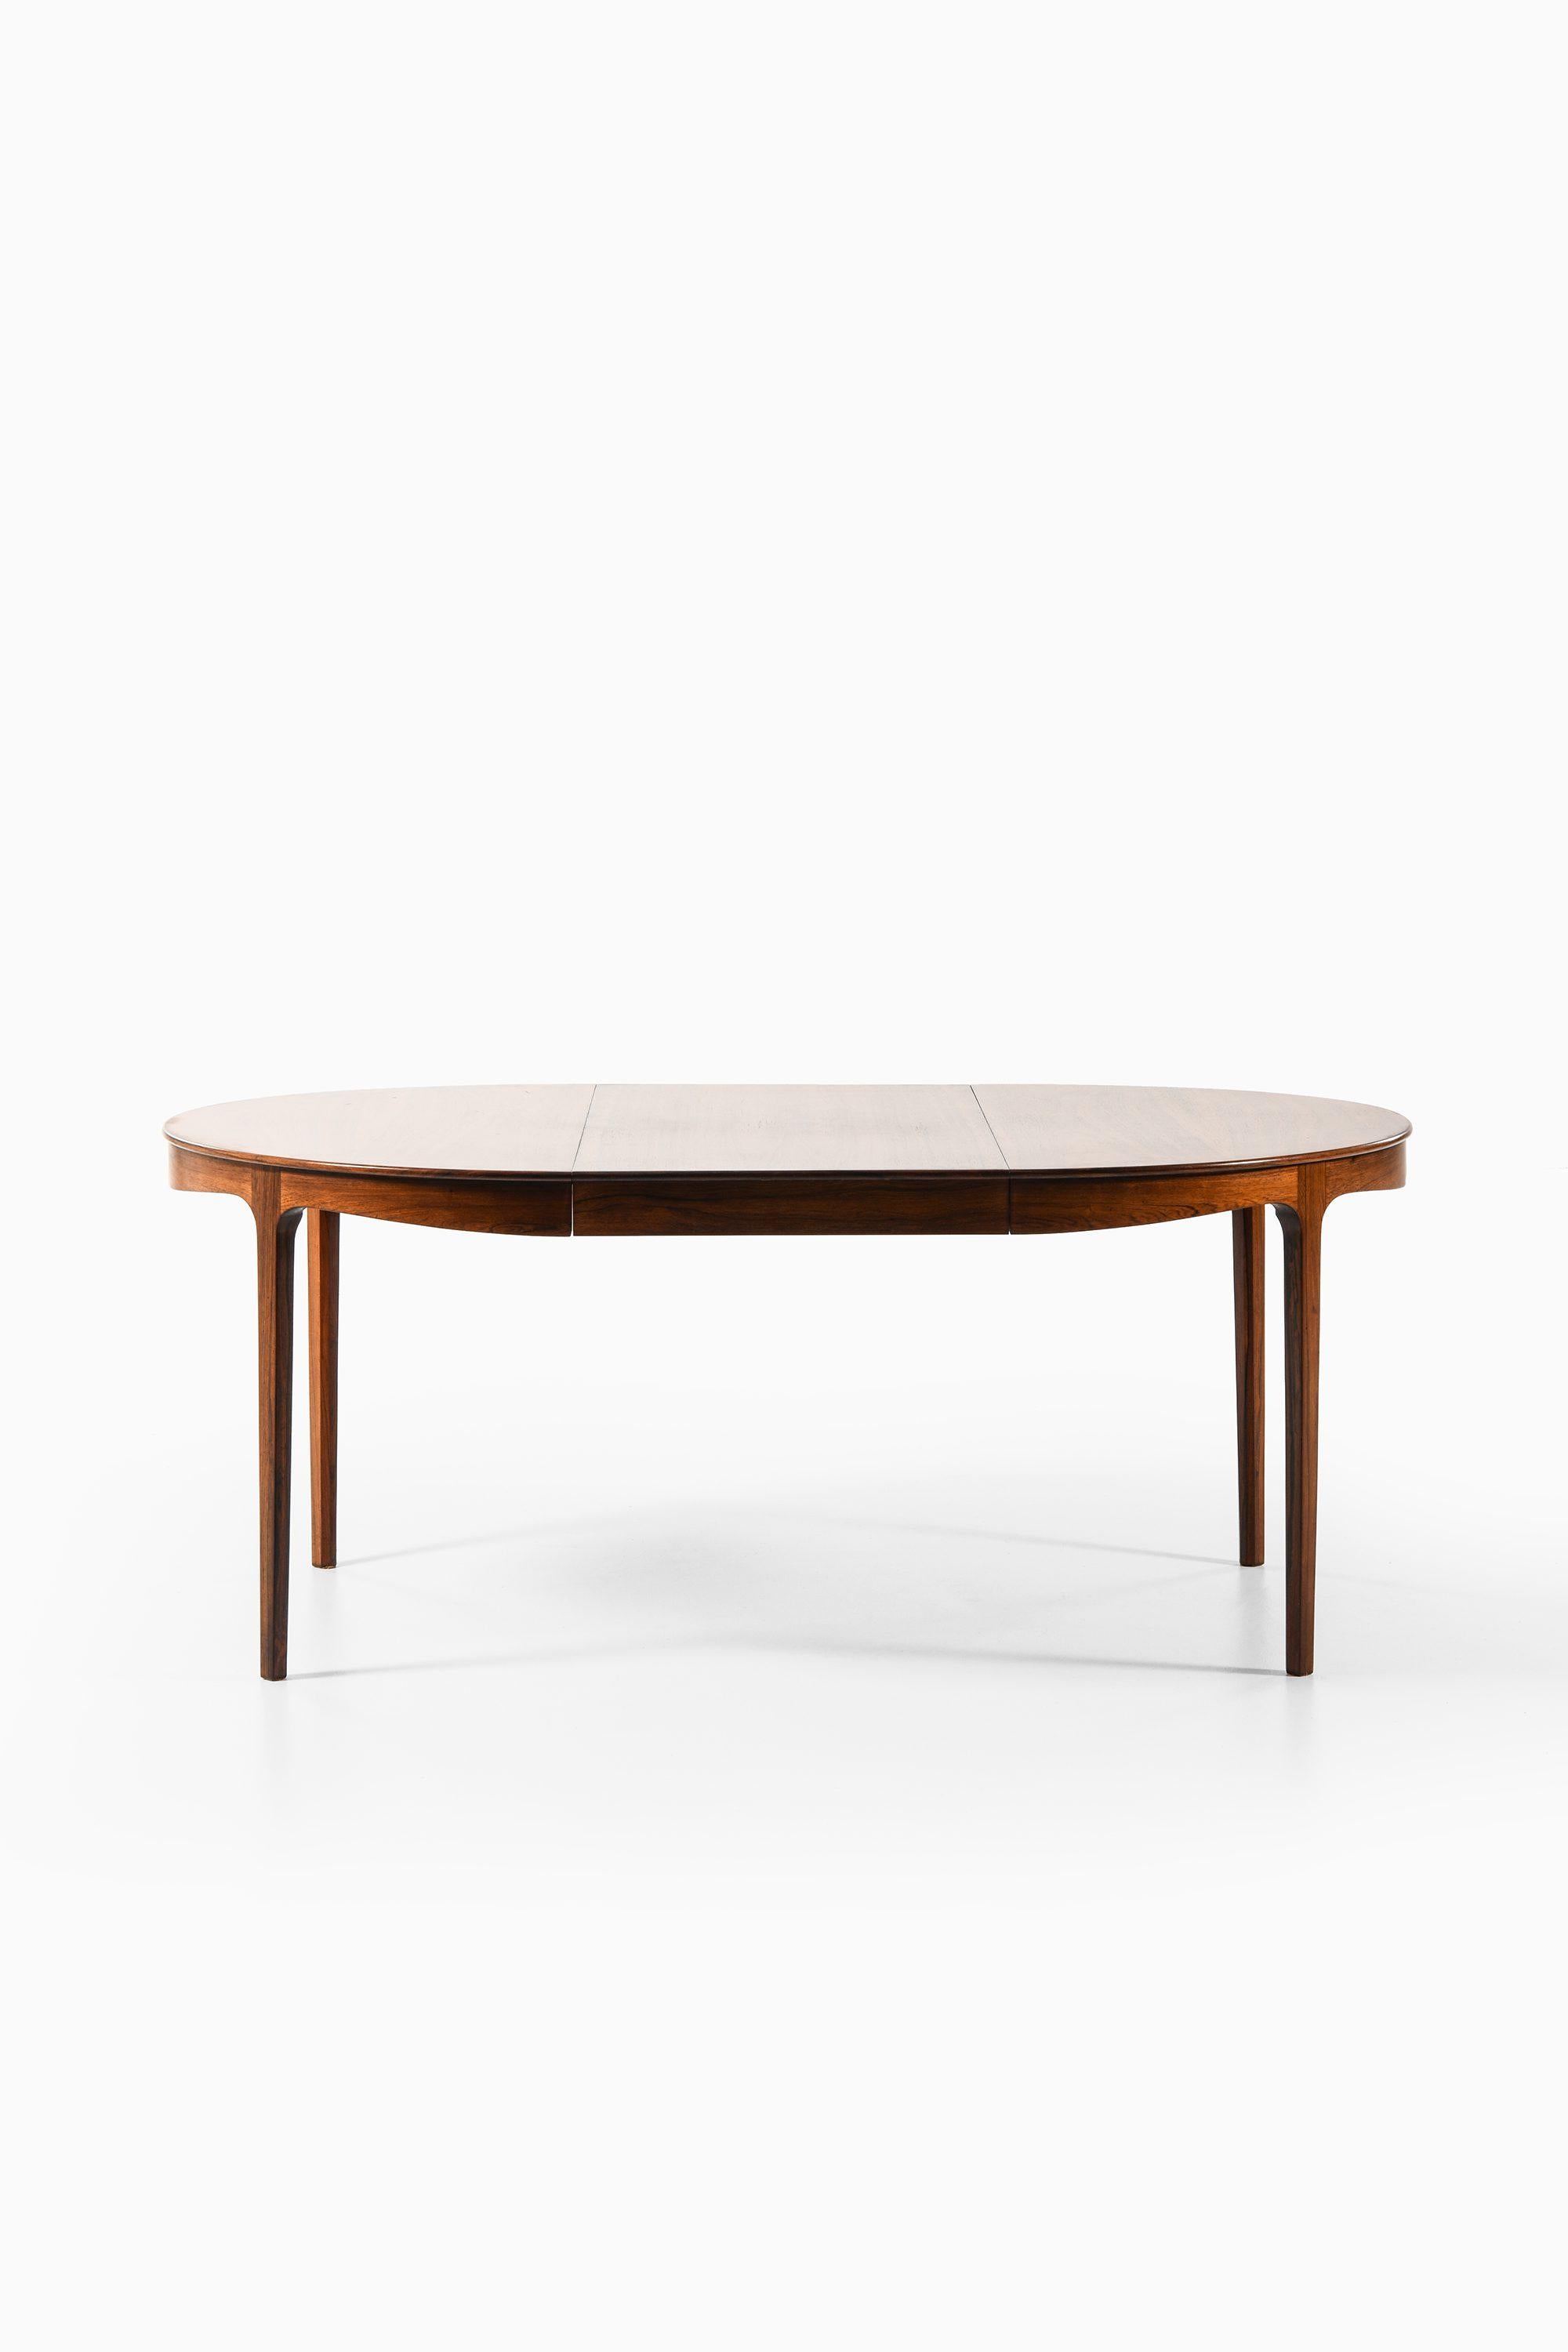 Scandinavian Modern Dining Table in Rosewood by Ole Wanscher, 1945 For Sale